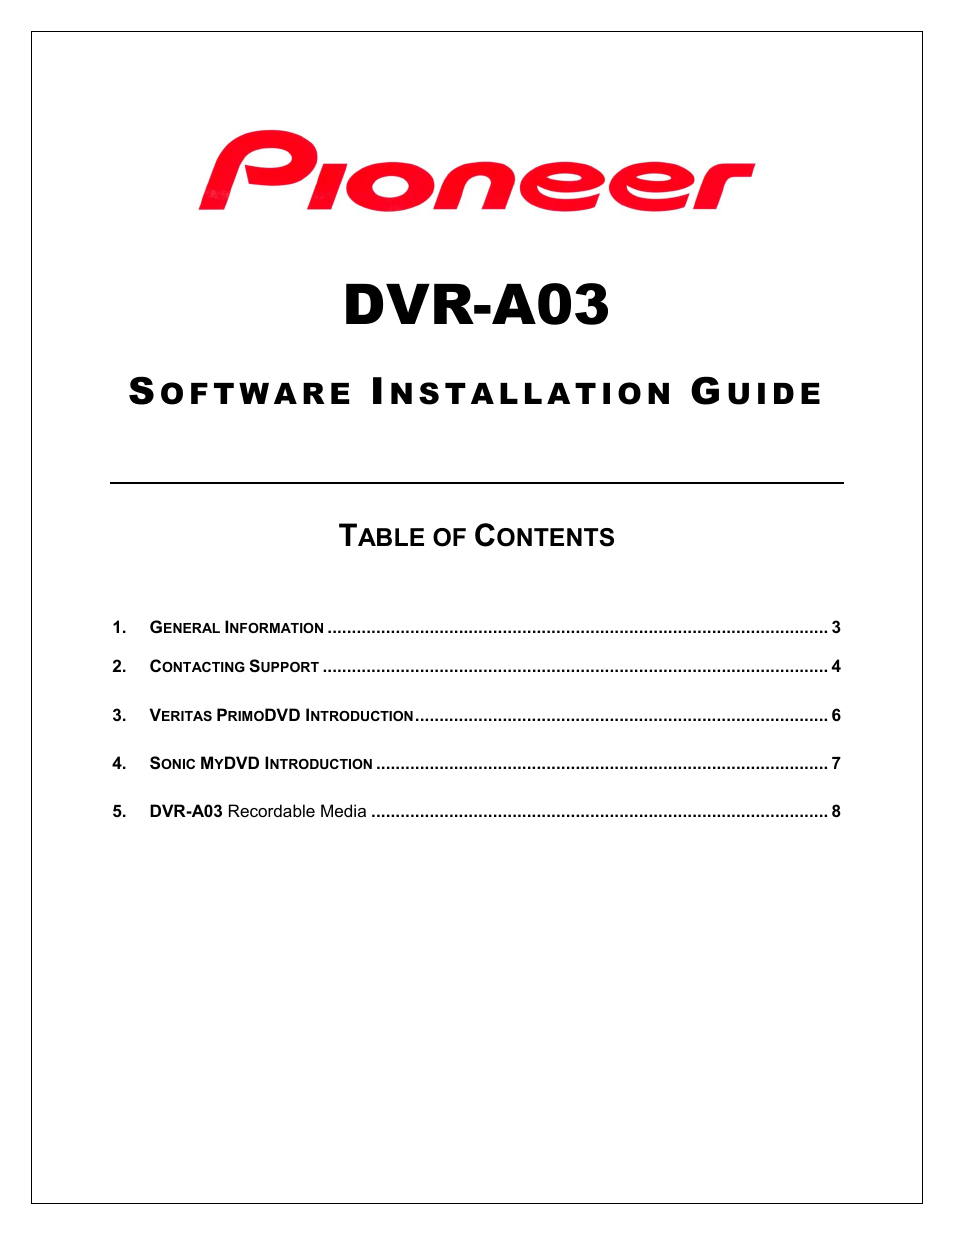 Recordable Drive DVR-A03